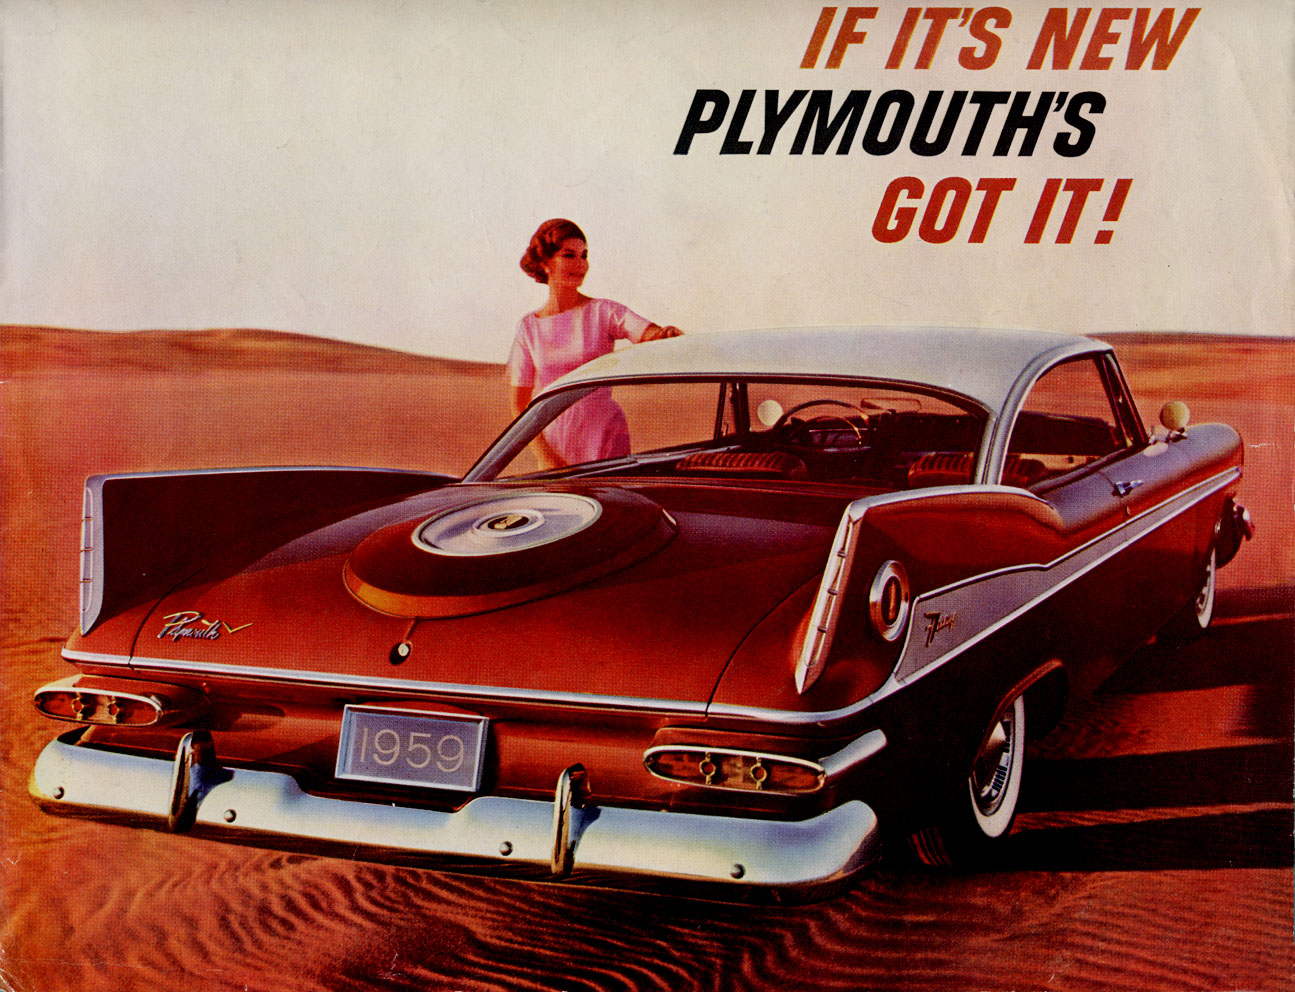 1959_Plymouth-01